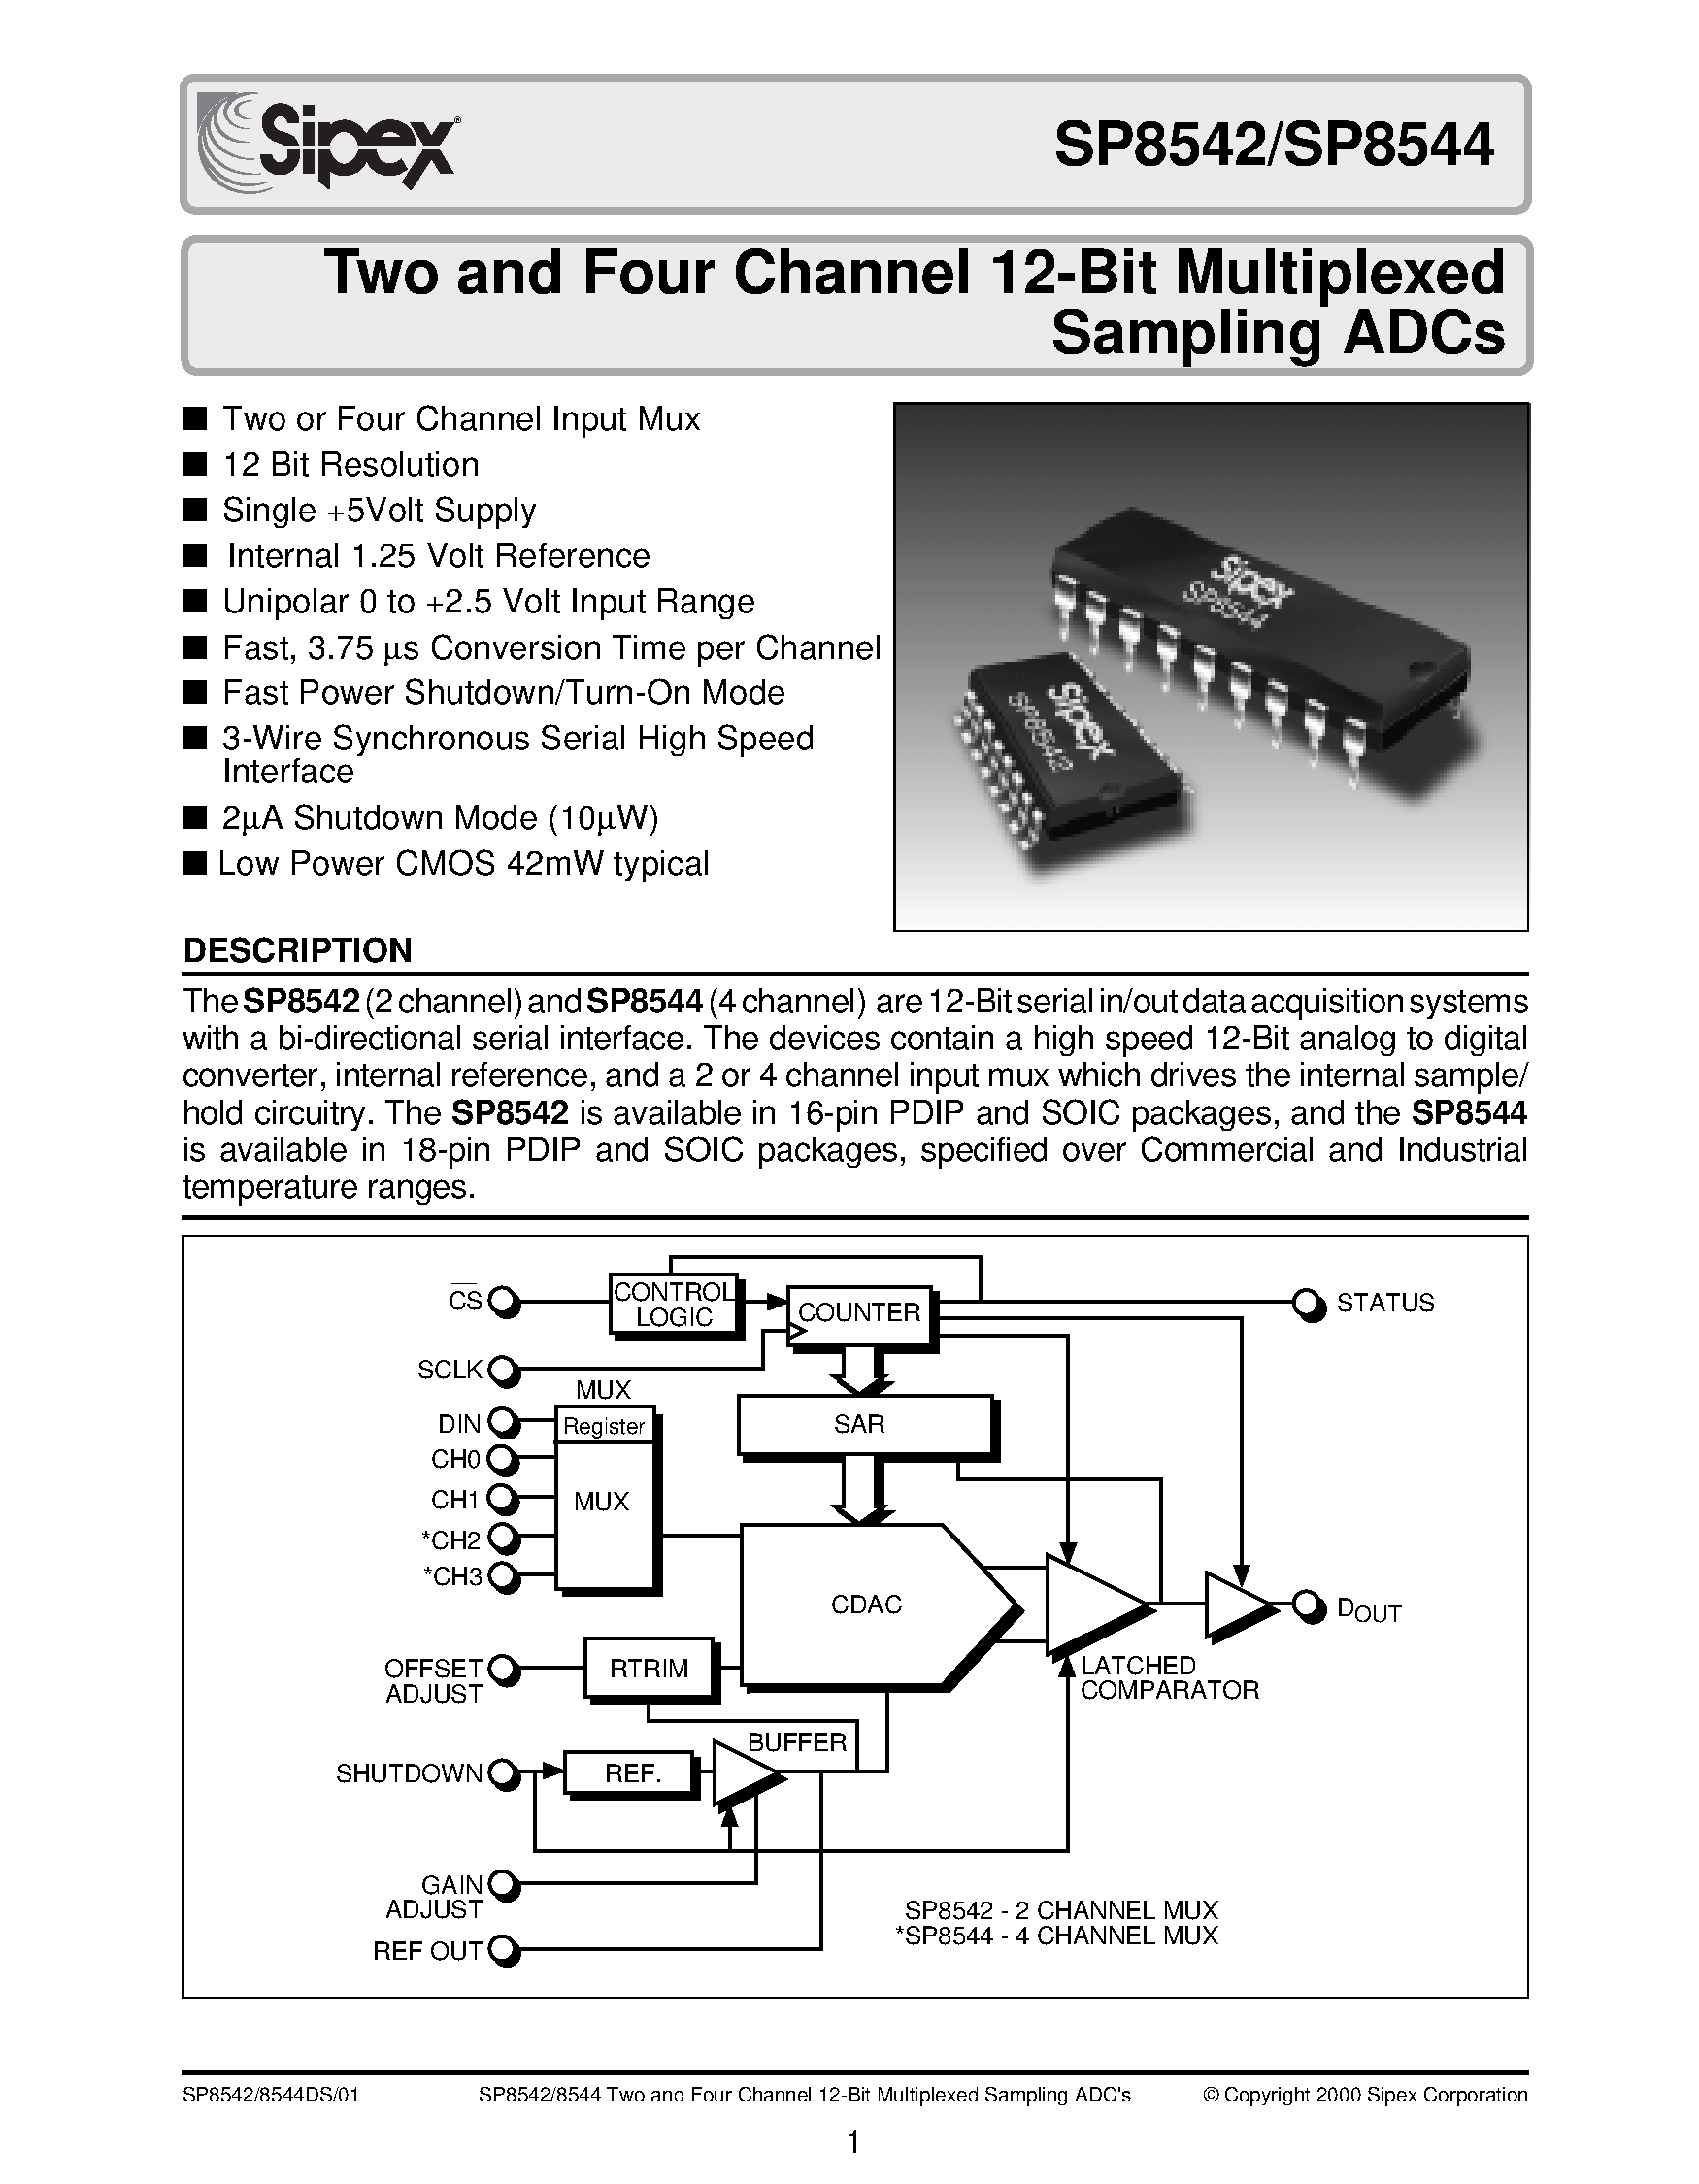 Datasheet SP8544BS - Two and Four Channel 12-Bit Multiplexed Sampling ADCs page 1